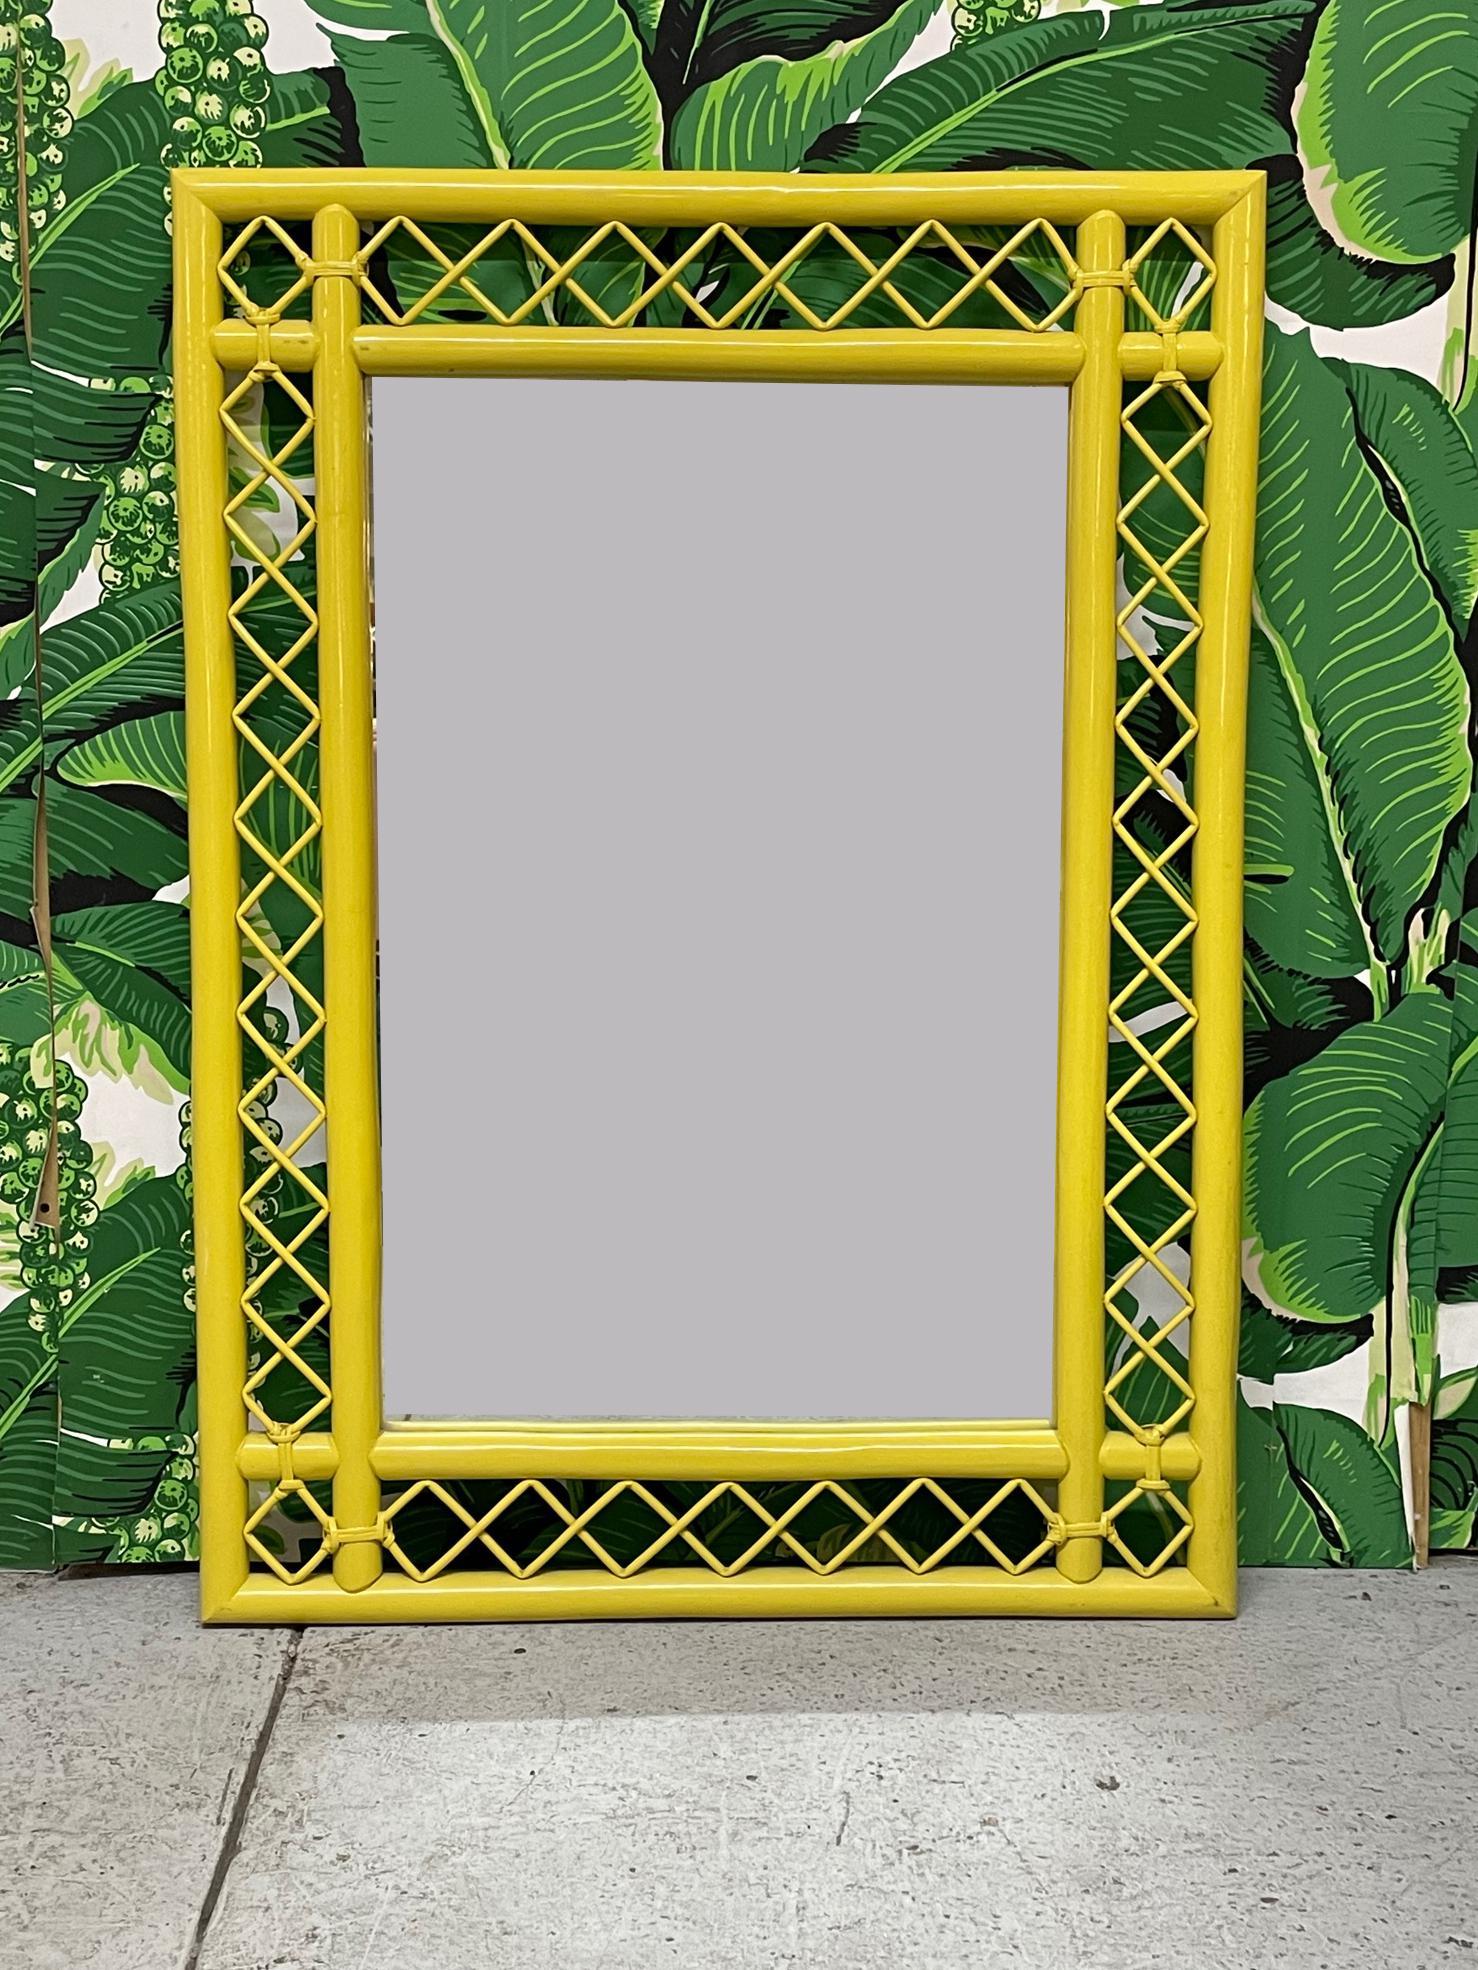 Vintage rattan wall mirror features intricate fretwork and a bright, cheery yellow lacquered finish. Good condition with only very minor imperfections consistent with age.

 